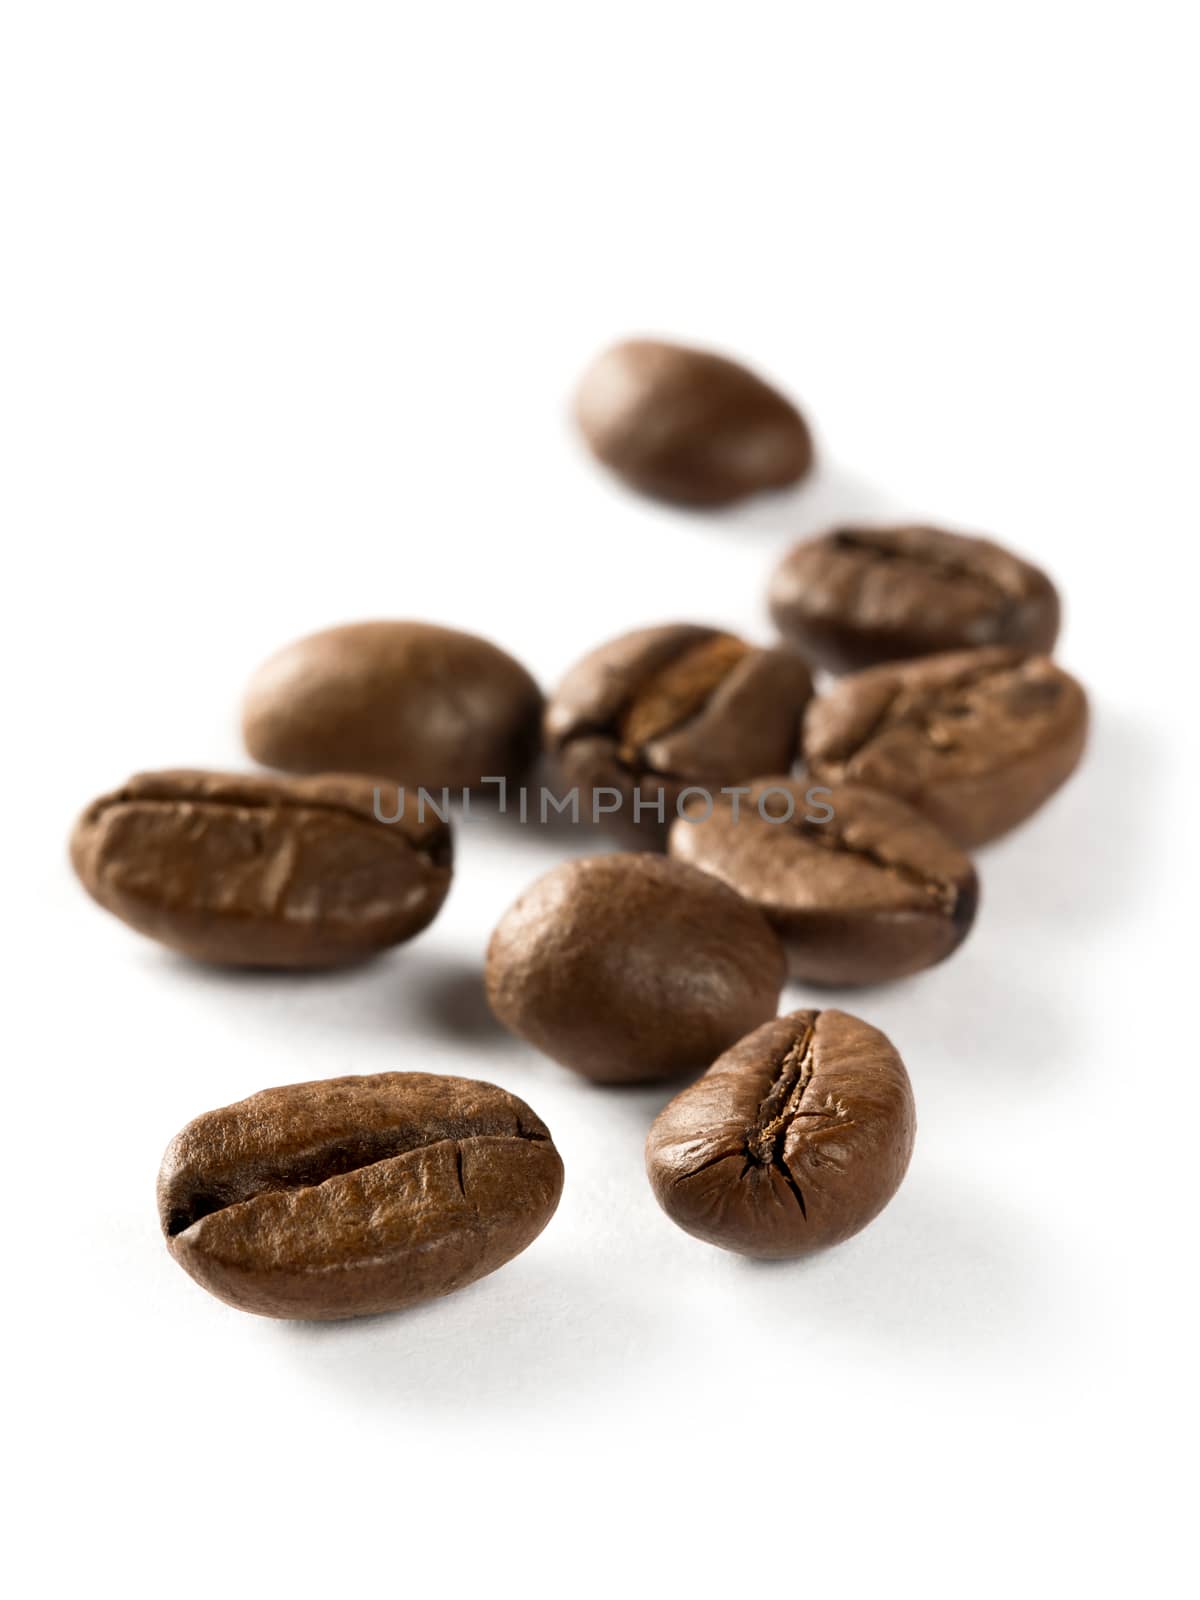 Macro photo of a small bunch of roasted coffee beans. Focus is on the first bean.
